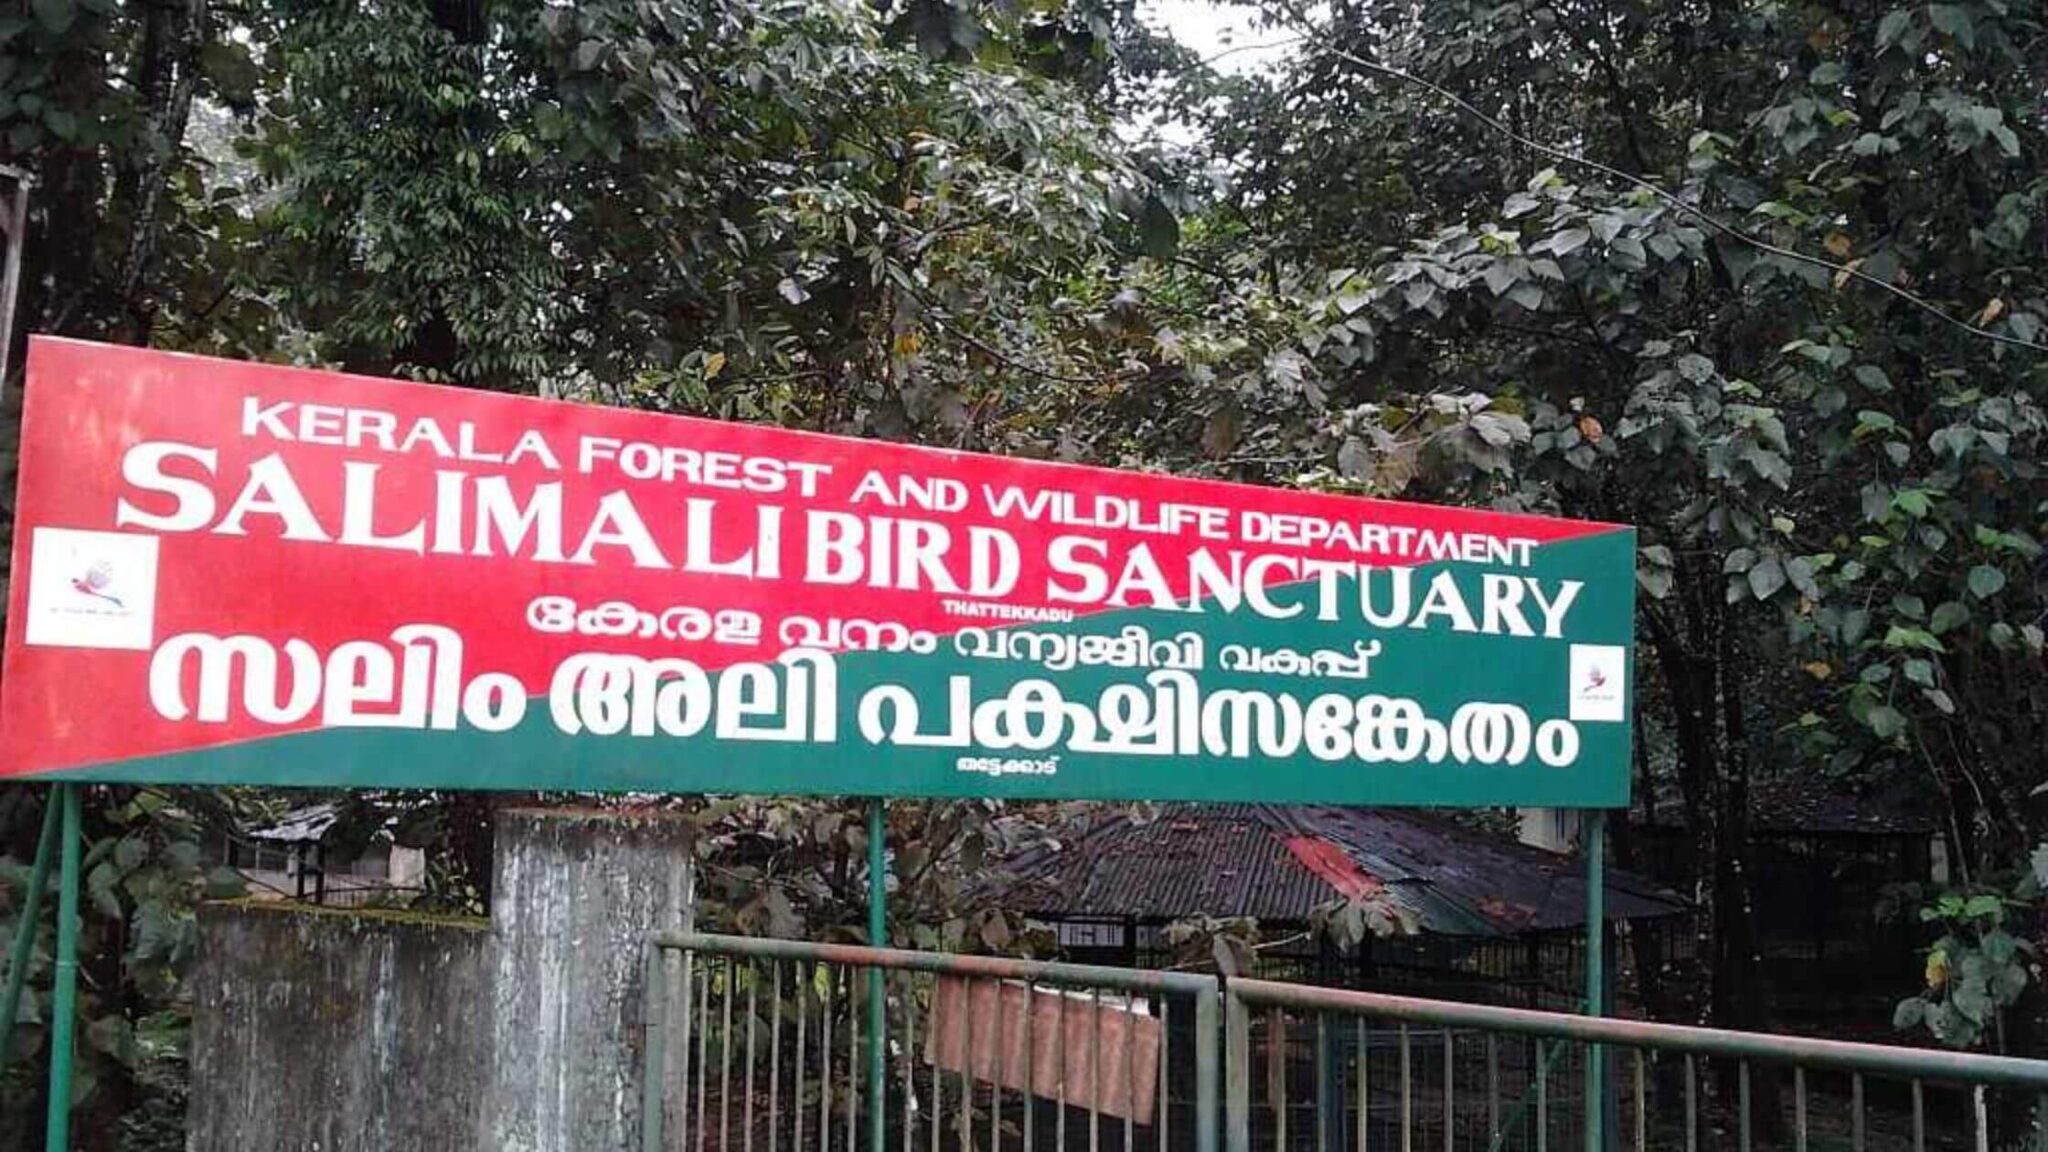 Thattekad Bird Sanctuary - Everything You Need to Know